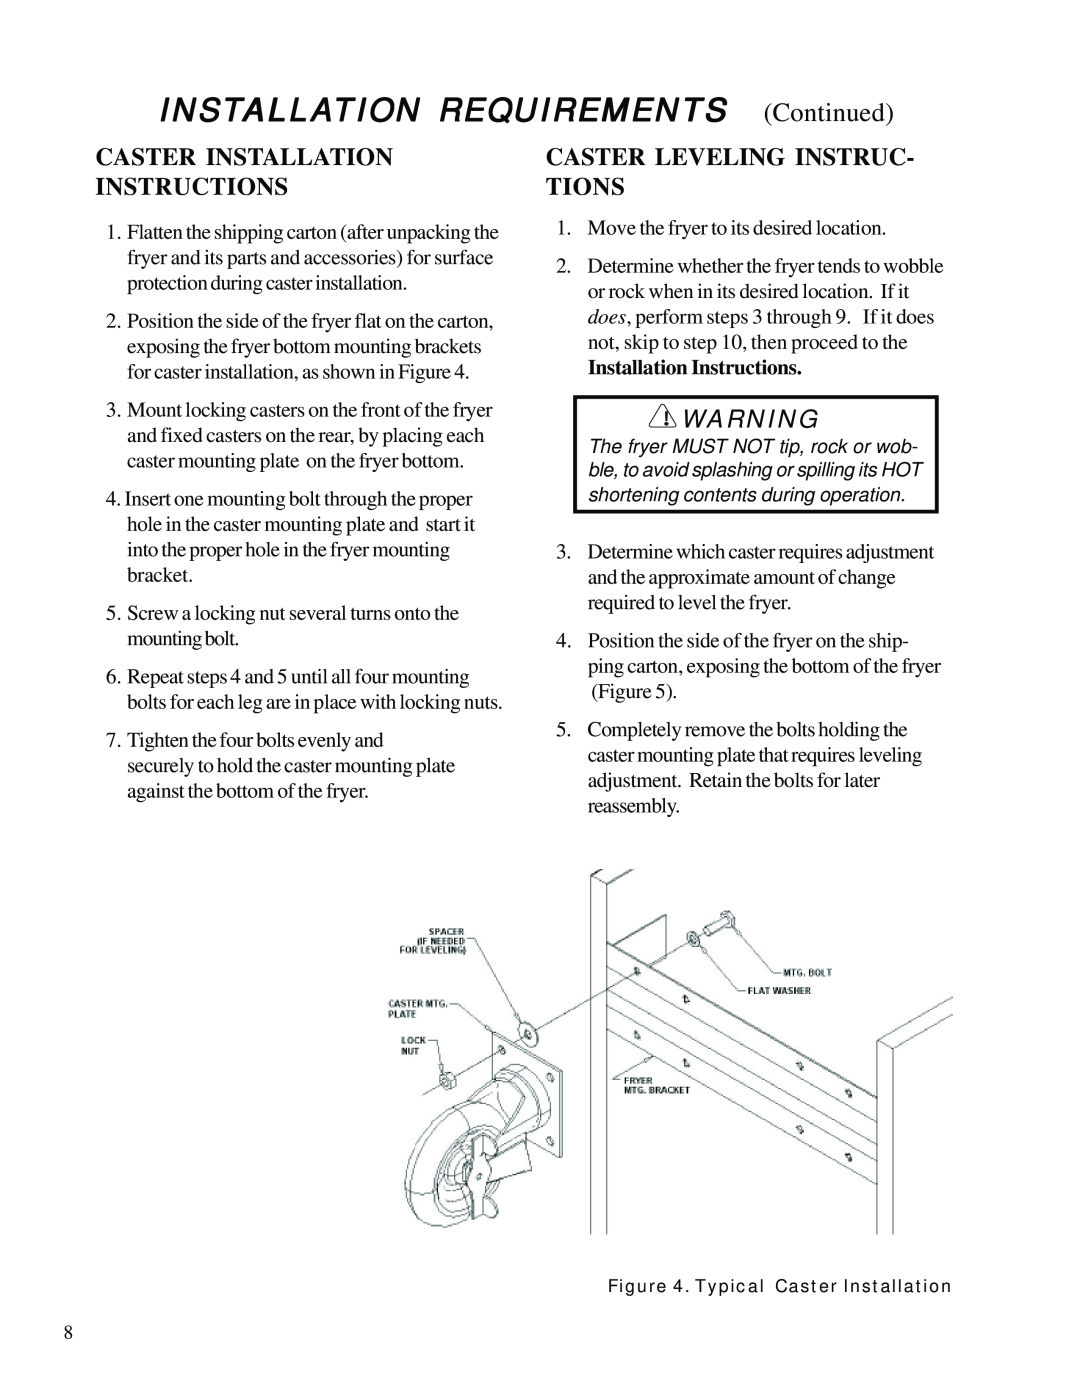 Anetsberger Brothers SLG40 warranty Caster Installation Instructions, Caster Leveling Instruc- Tions 